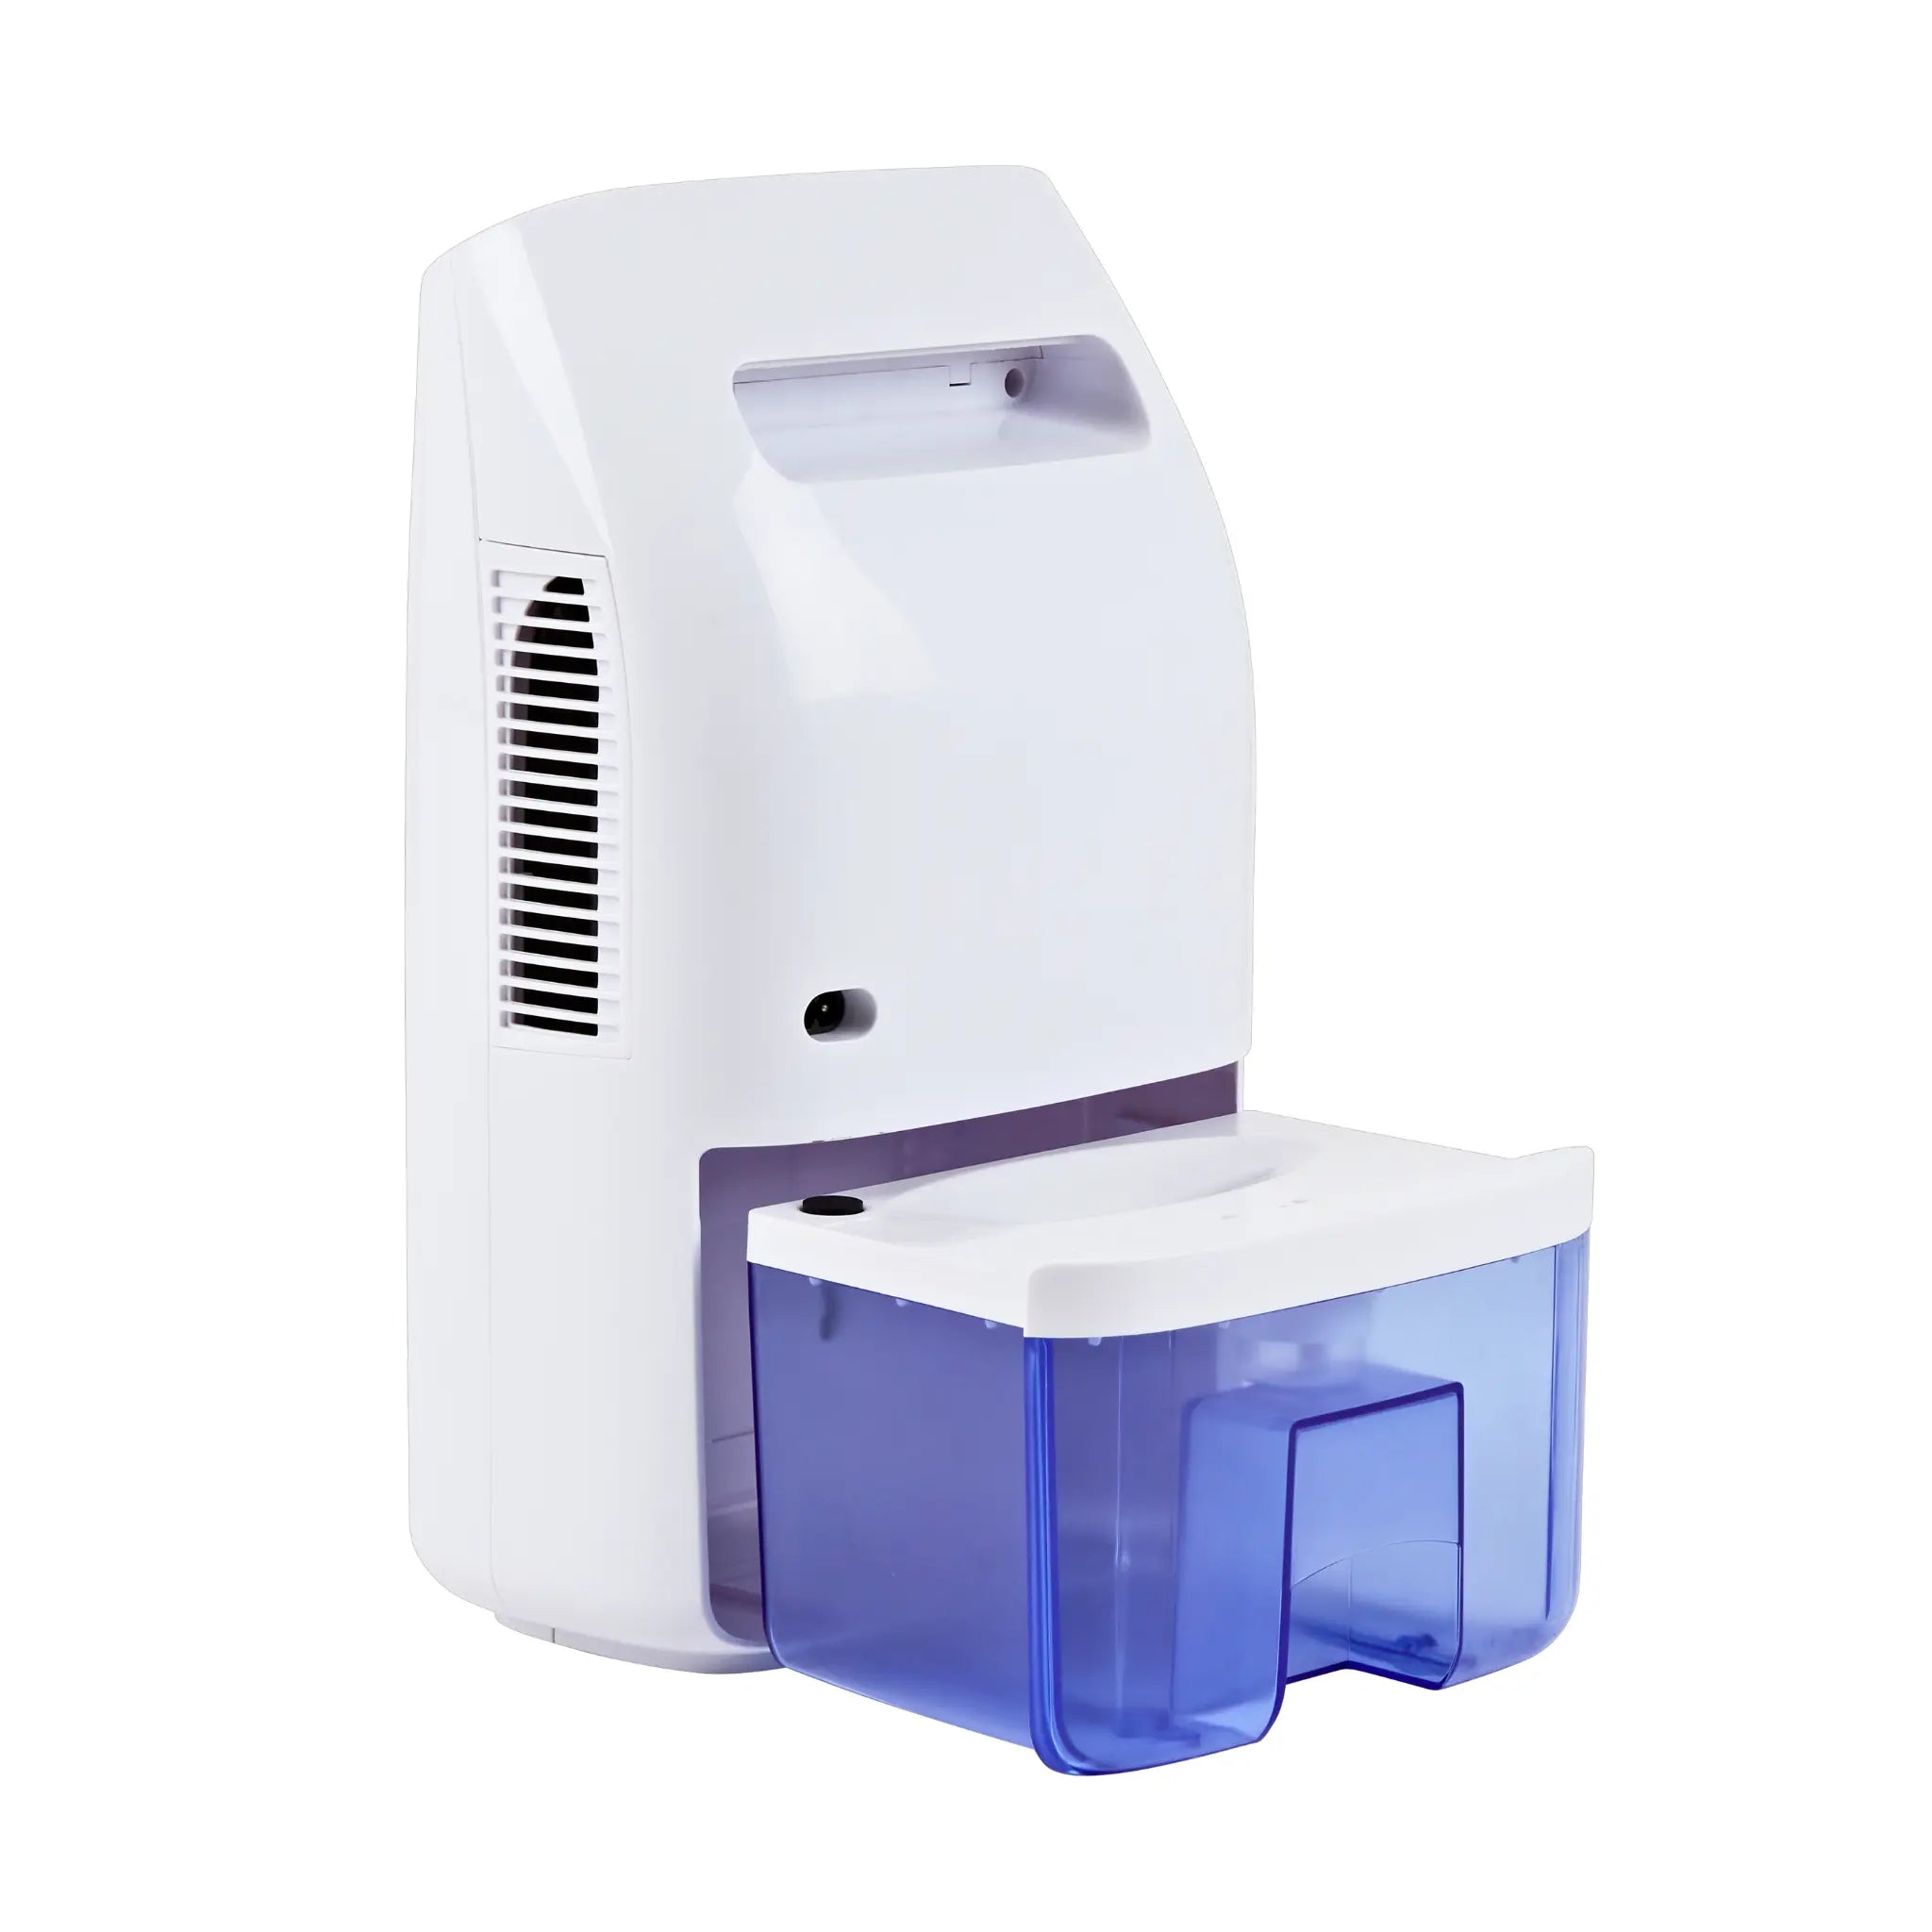 Senelux 750ml dehumidifier with the water tank being drawn from the back. The easy draw water tank is purple and white.